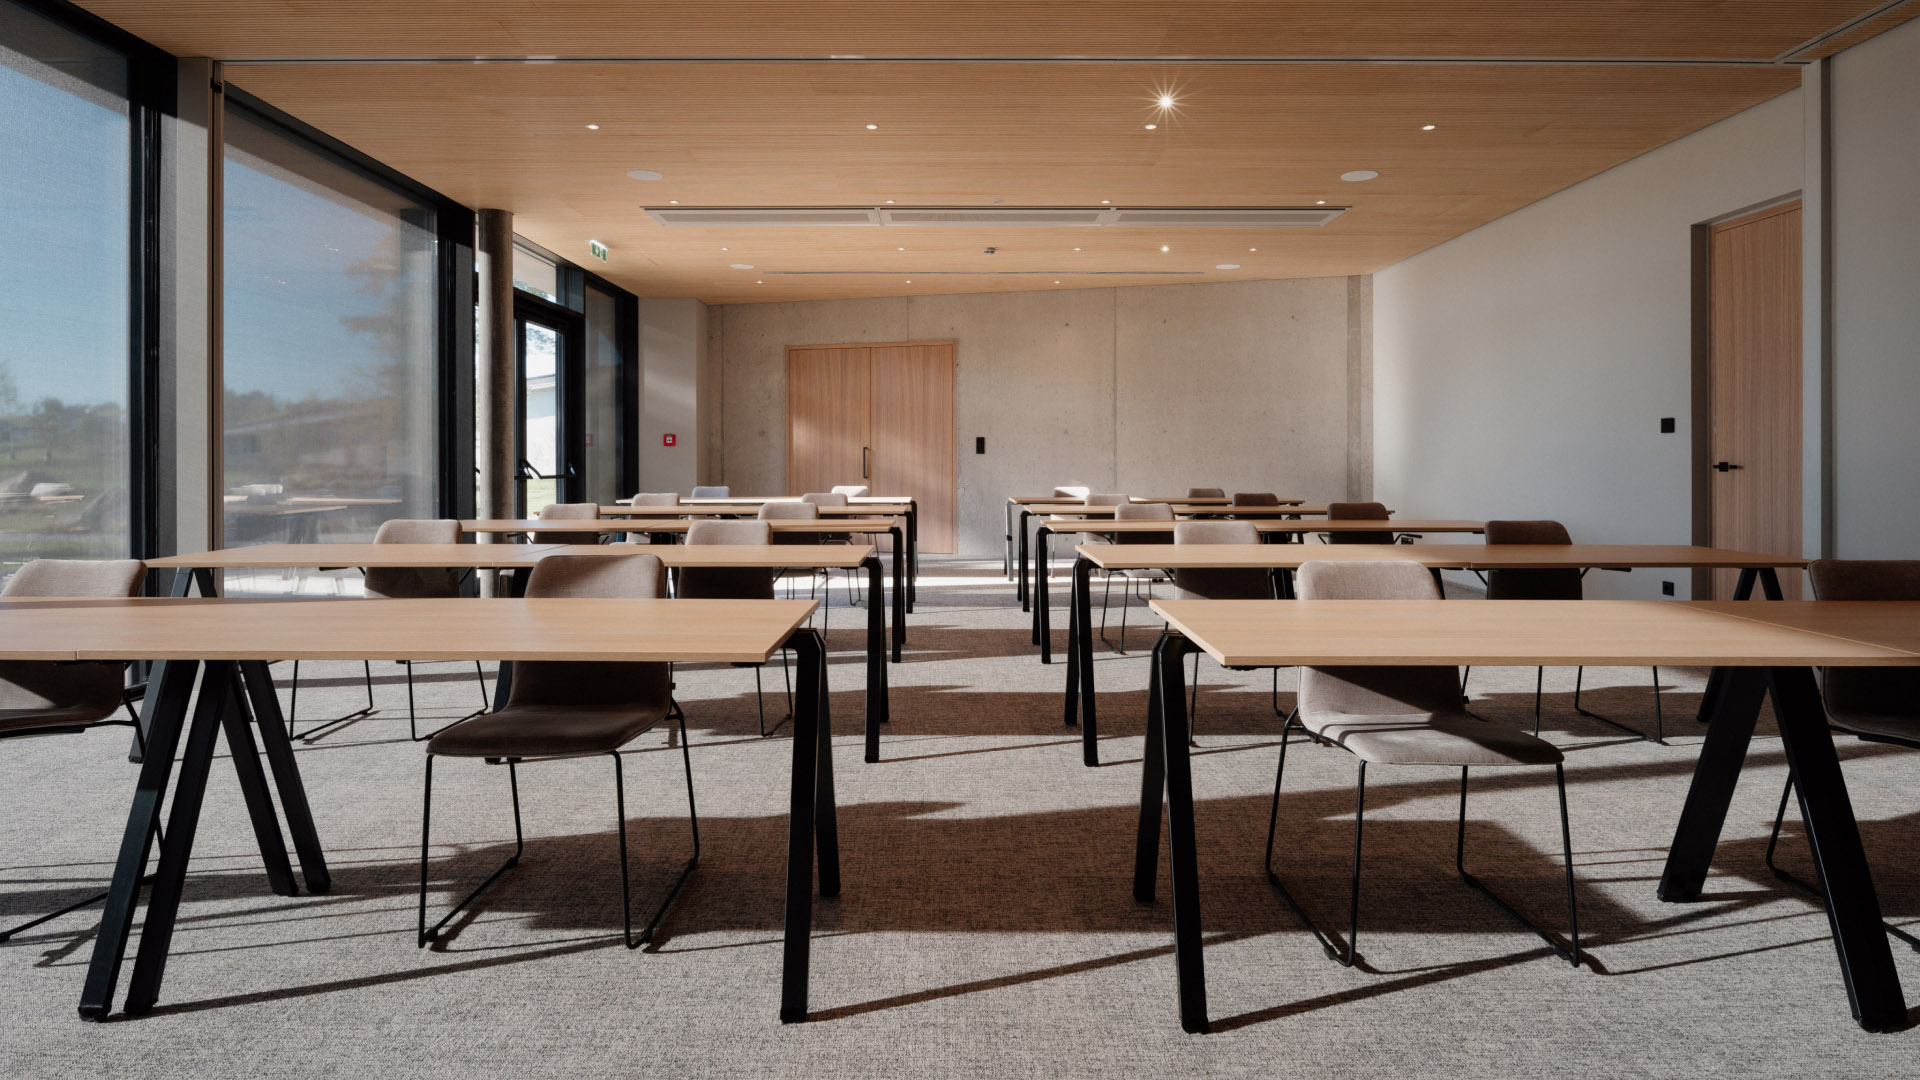 Intelligent hotel automation makes it easy to integrate lighting, shading, air conditioning and multimedia technology into seminar rooms